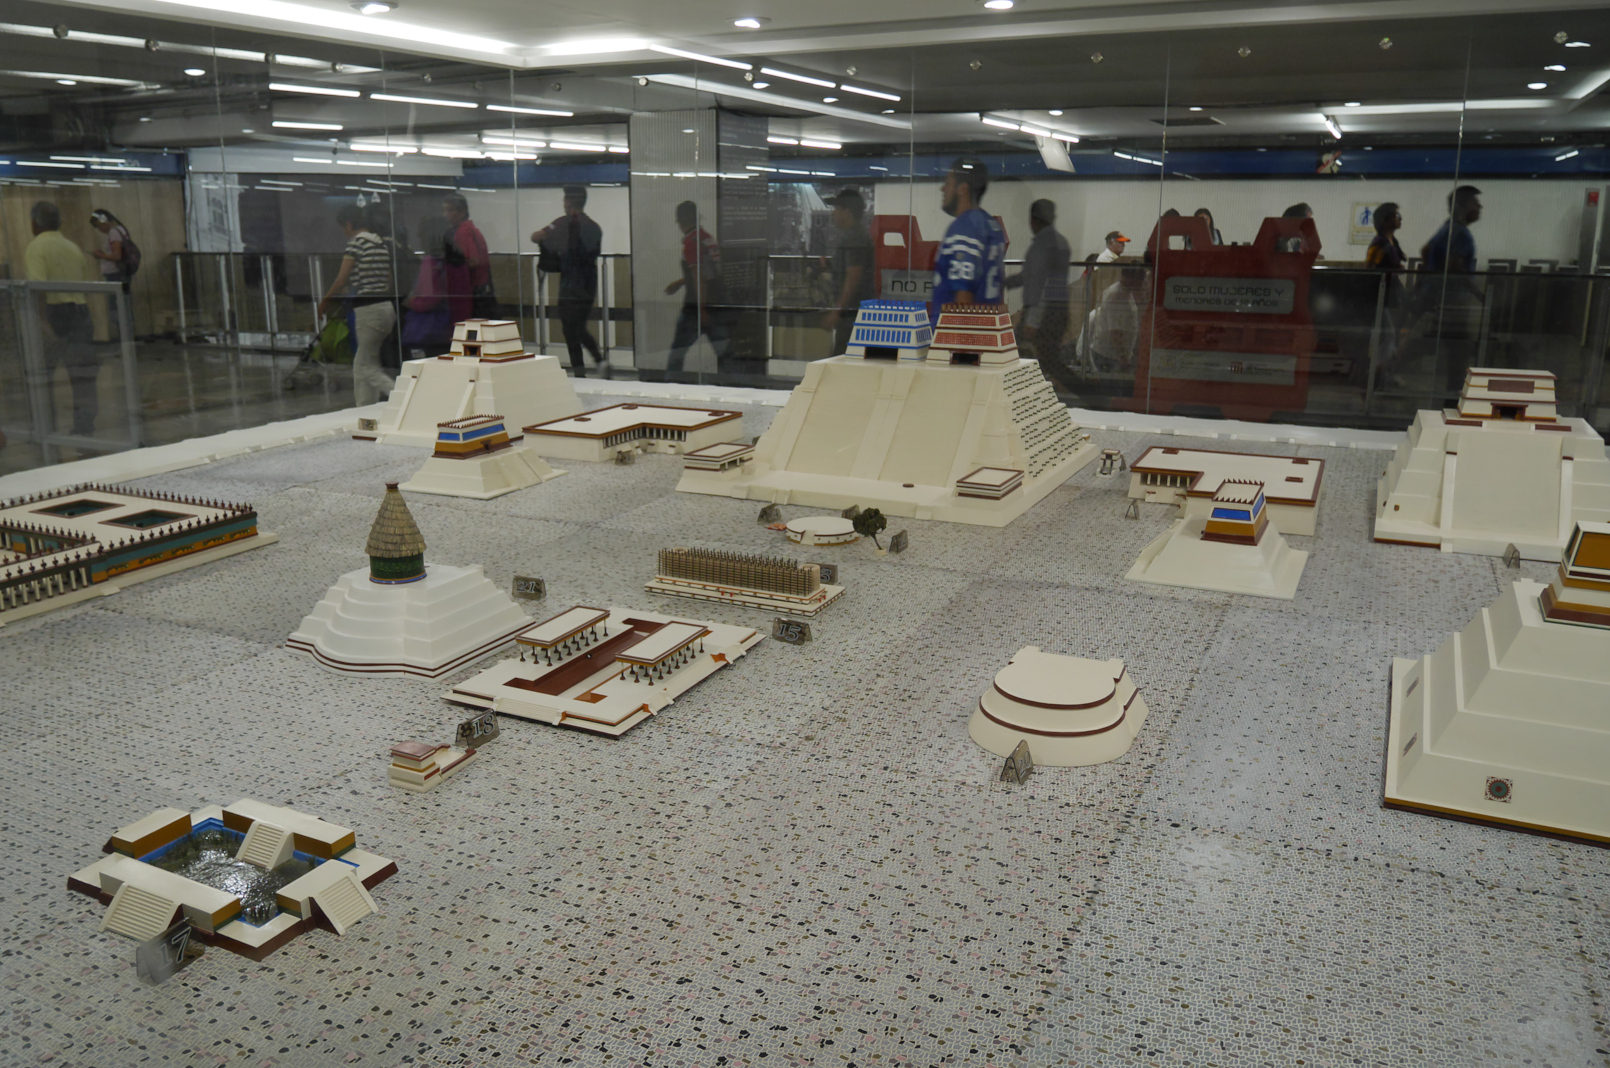 Diorama of the prehispanic incarnation of the Zócalo, in the concourse of the metro station.